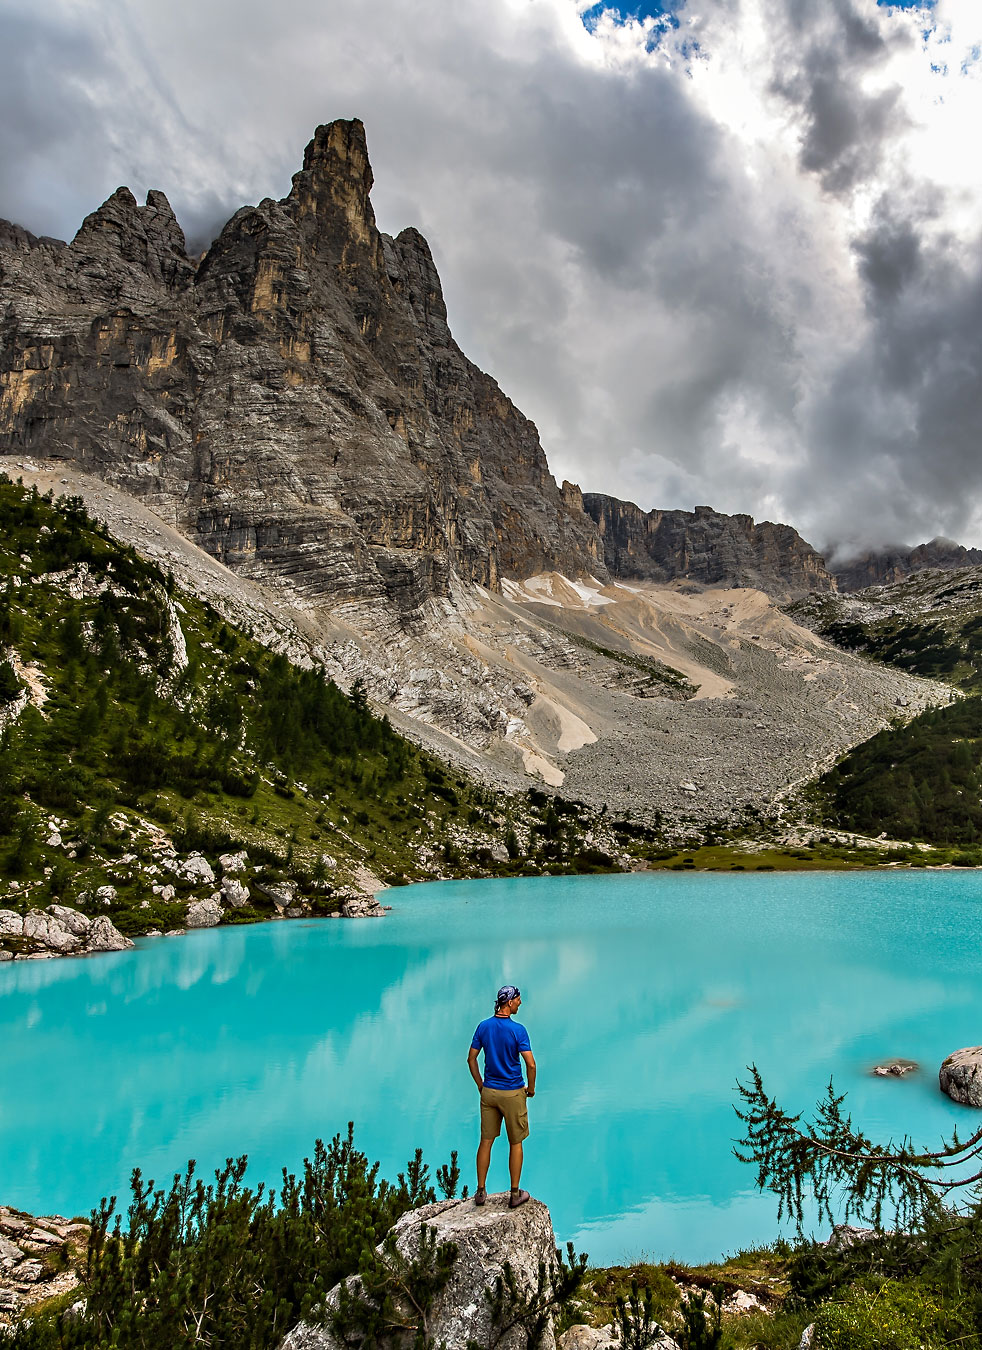 Man standing over turquoise backcountry lake in the Dolomites of Italy.